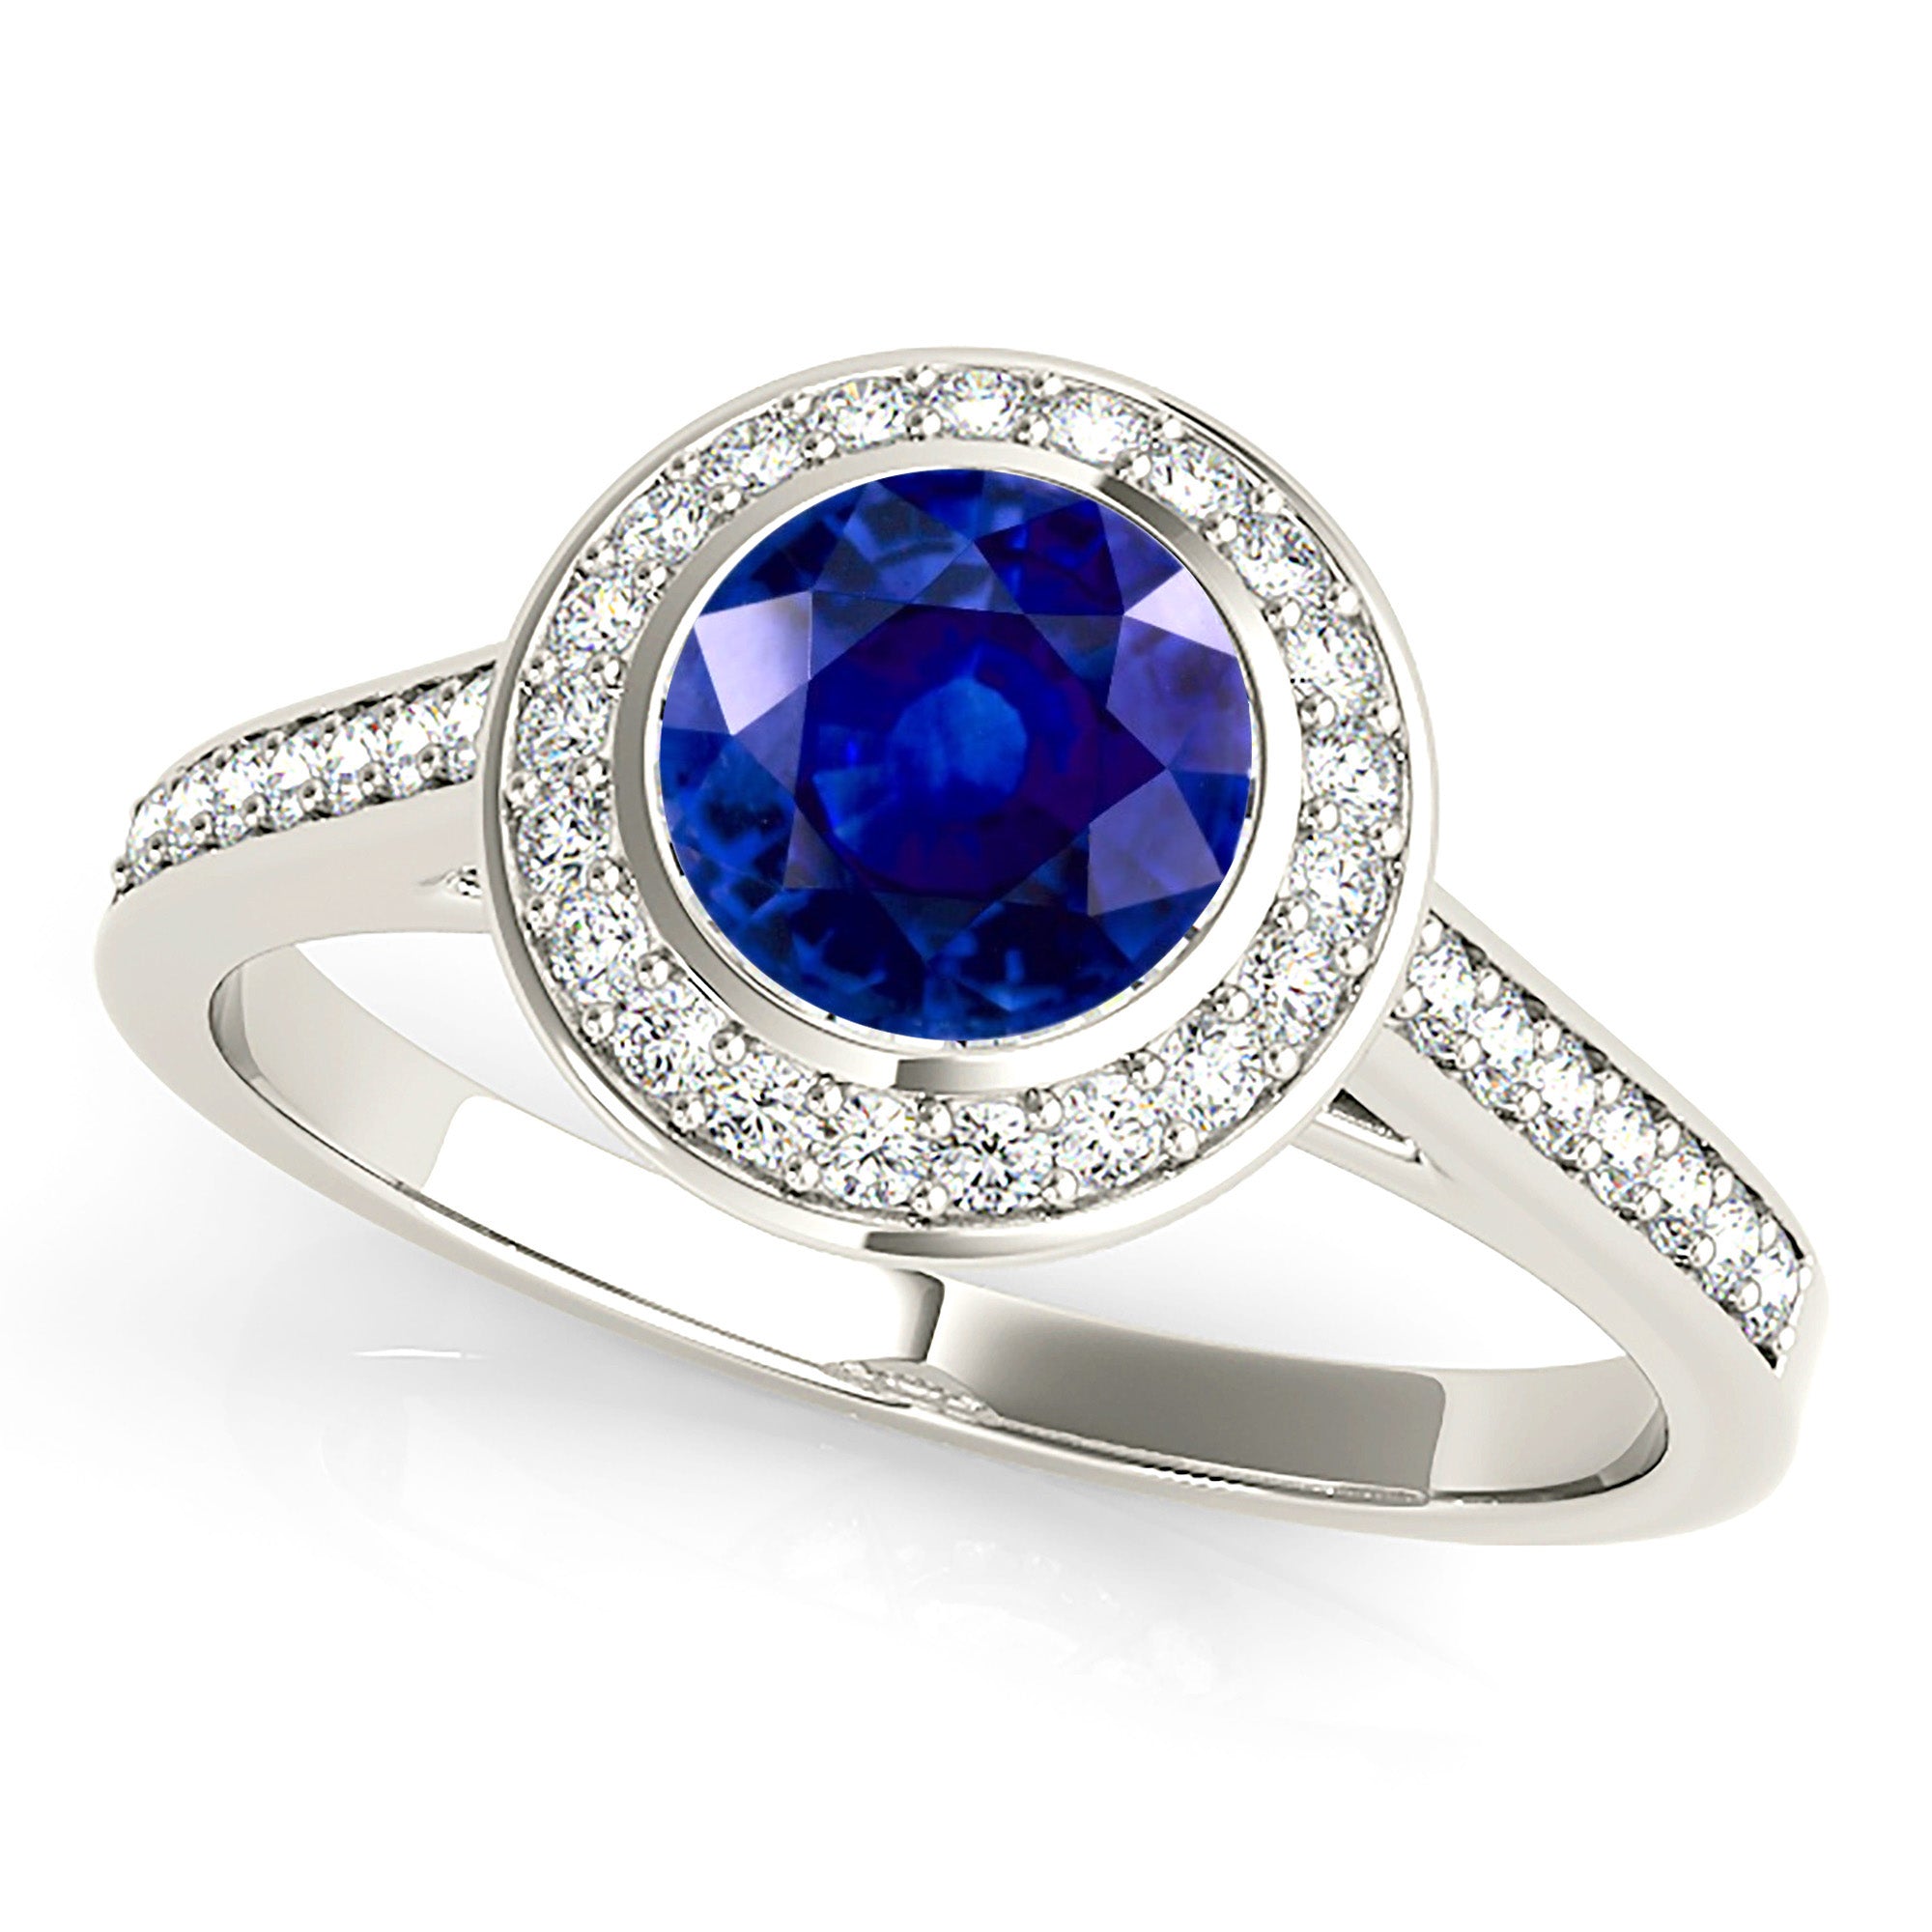 1.35 ct. Genuine Blue Sapphire Halo Ring With 0.25 ctw. Under Halo And Side Diamonds-in 14K/18K White, Yellow, Rose Gold and Platinum - Christmas Jewelry Gift -VIRABYANI